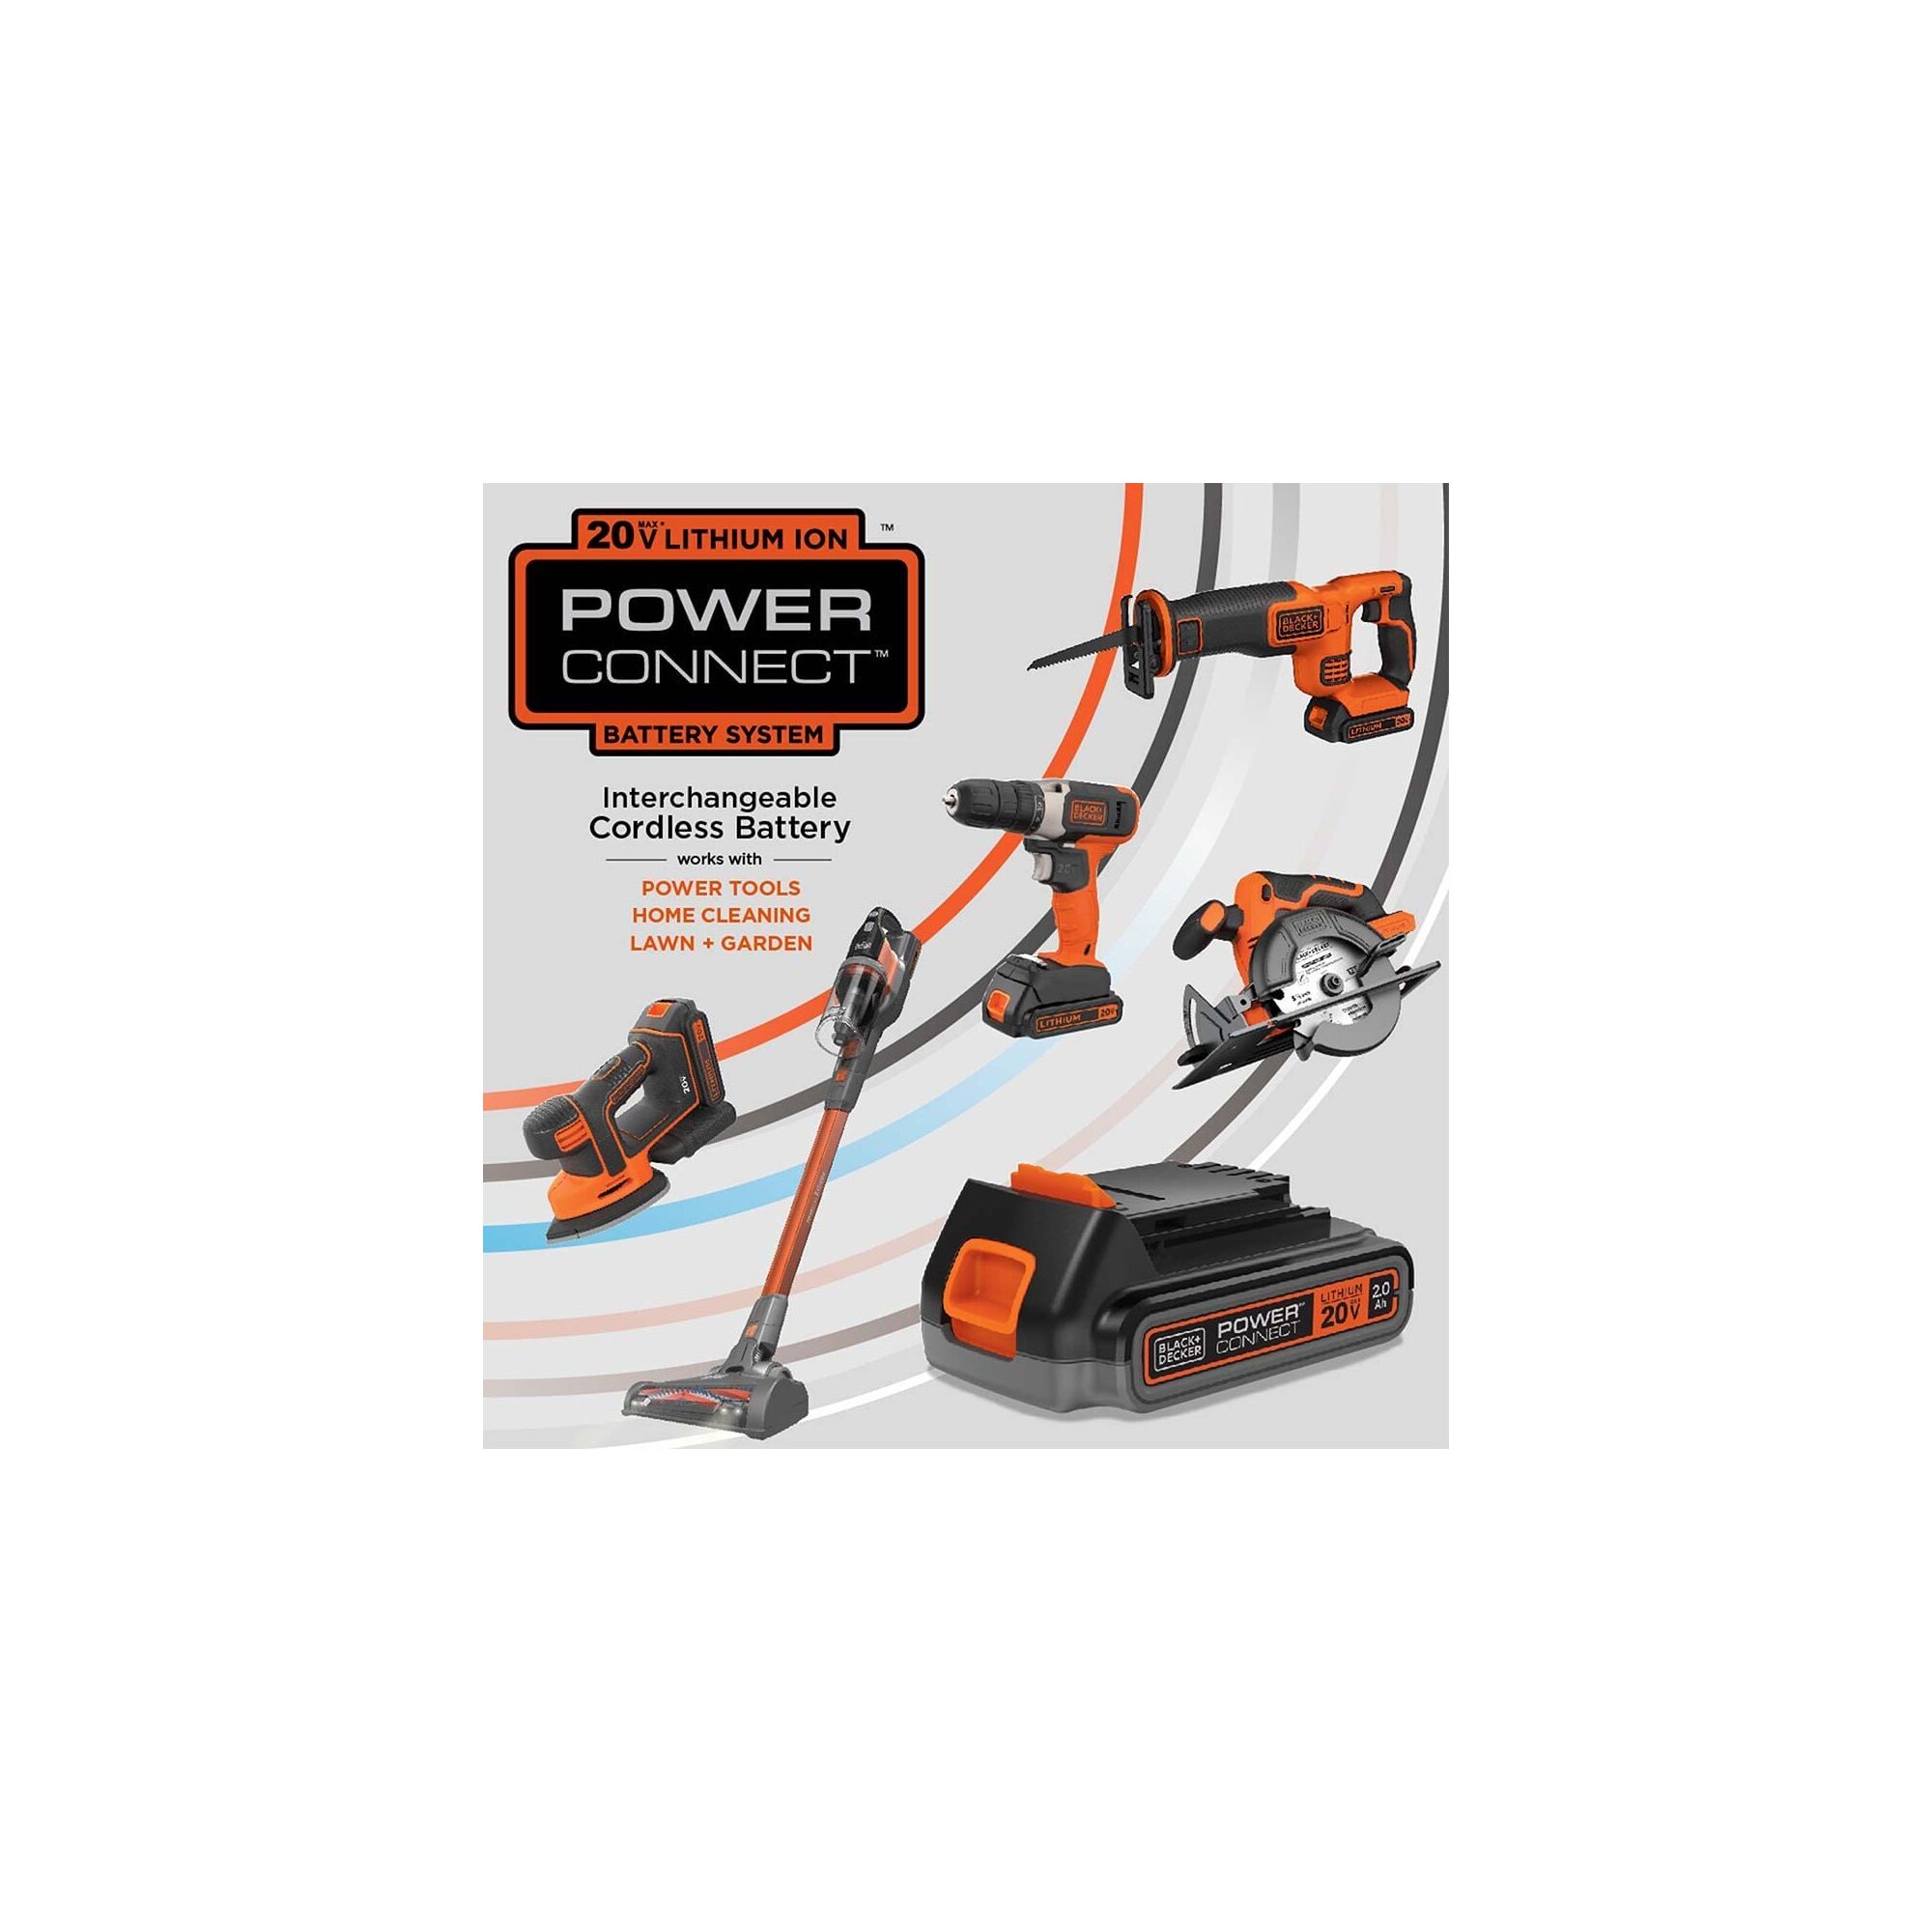 Assortment of BLACK+DECKER Powerconnect tools grouped together